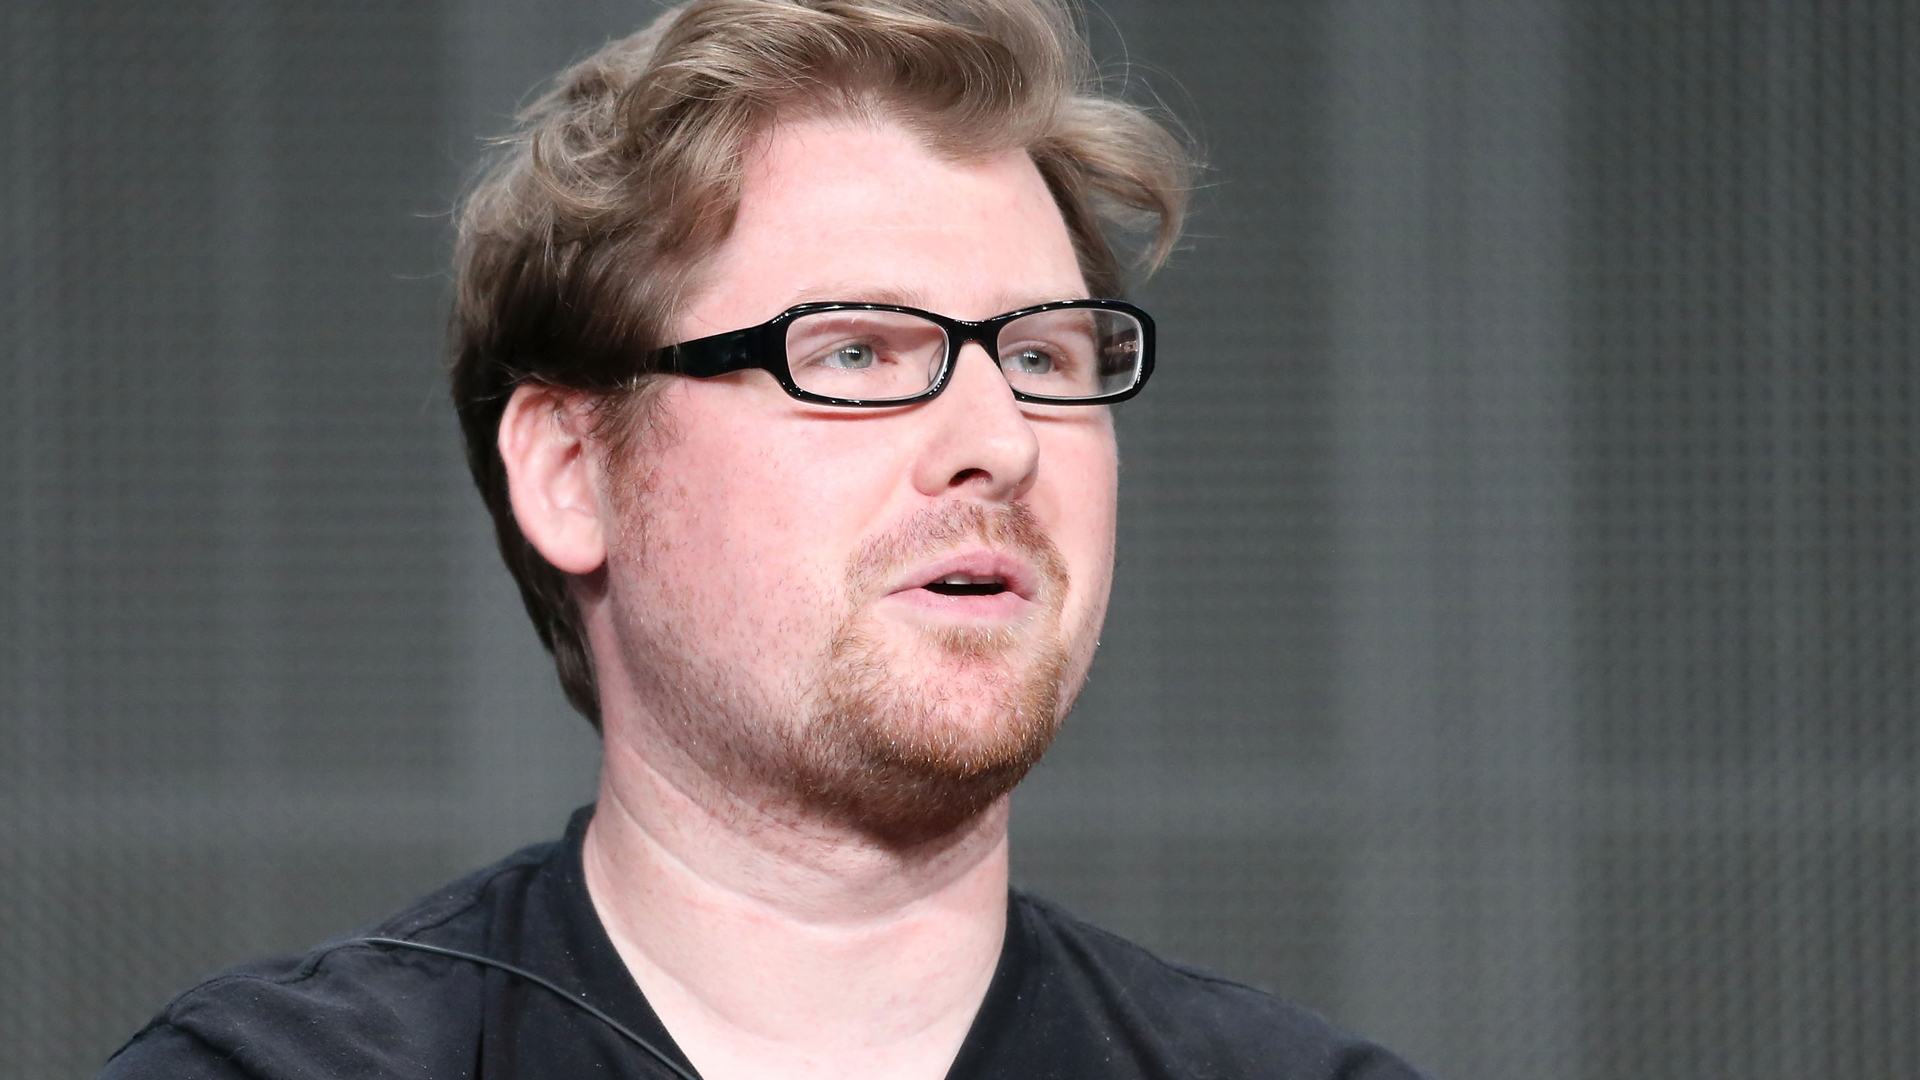 ‘Rick and Morty’ co-creator Justin Roiland speaks onstage during the Adult Swim: Rick and Morty panel at the Turner Broadcasting portion of the 2013 Summer Television Critics Association tour at the Beverly Hilton Hotel on July 24, 2013 in Beverly Hills, California